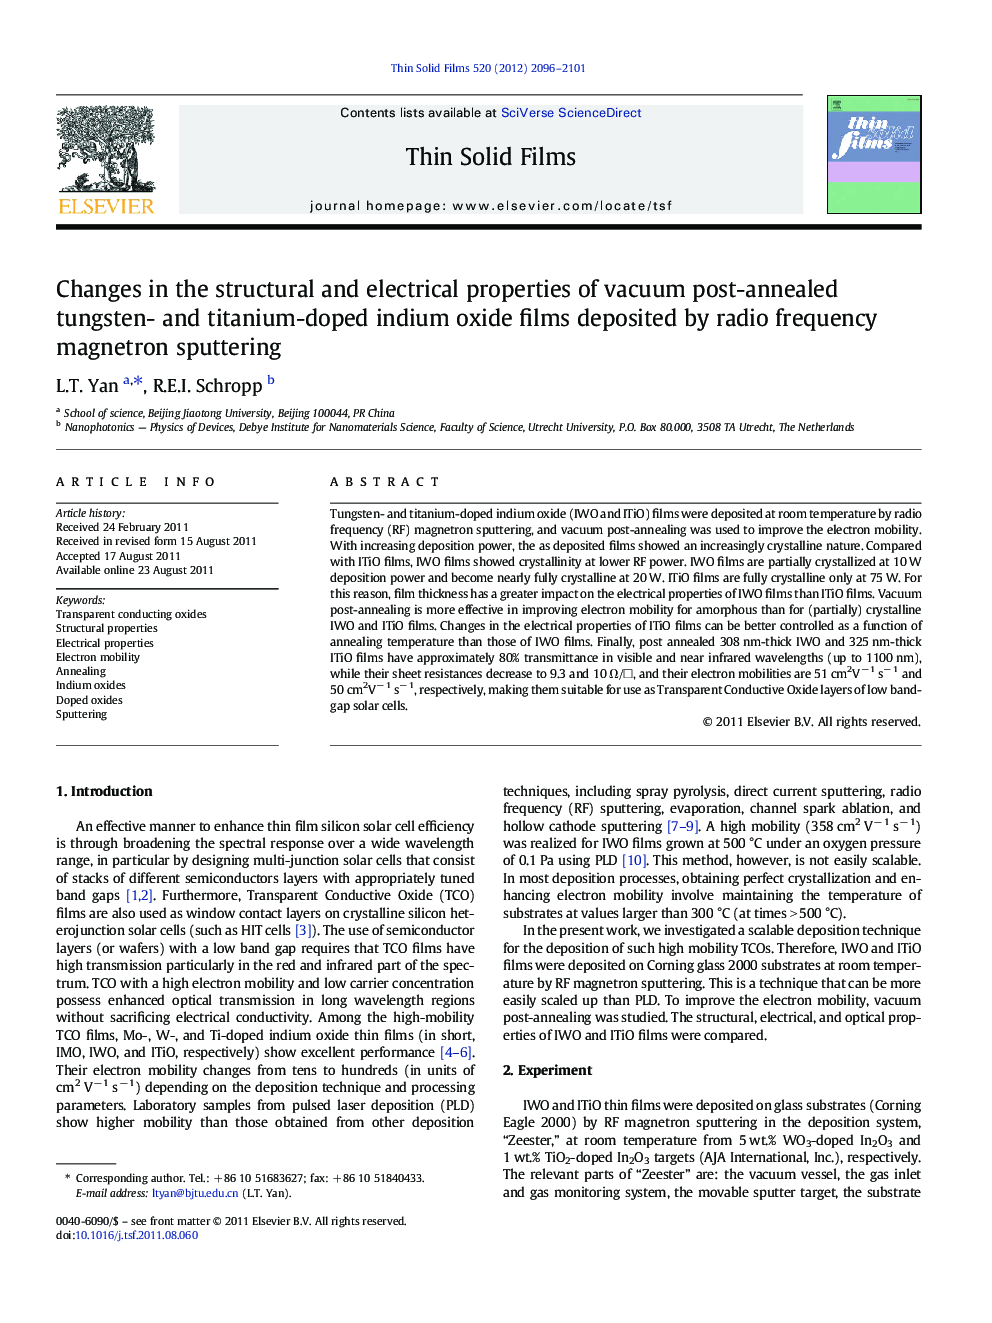 Changes in the structural and electrical properties of vacuum post-annealed tungsten- and titanium-doped indium oxide films deposited by radio frequency magnetron sputtering